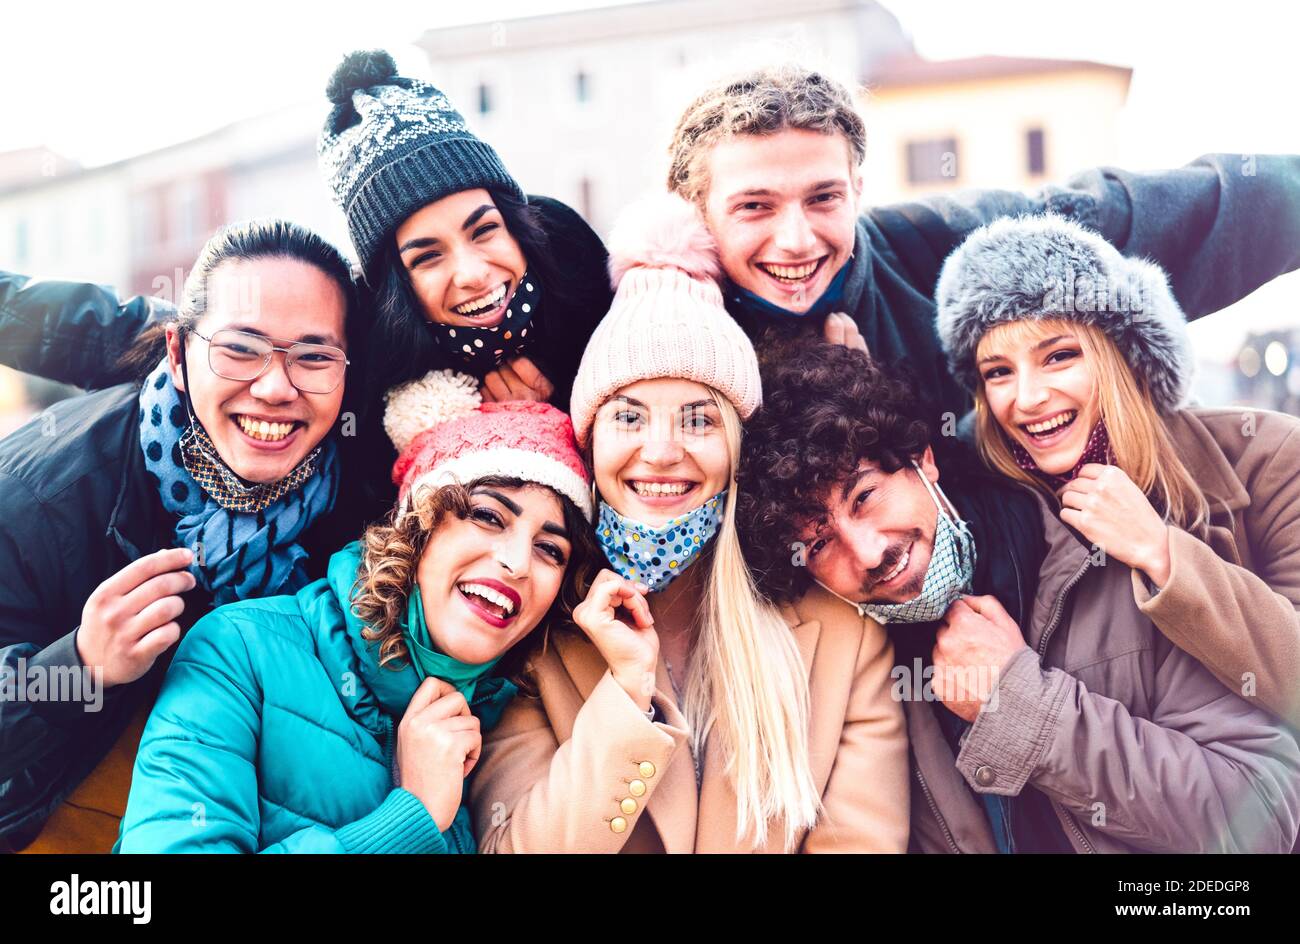 Multiracial friends taking selfie with open face mask and winter clothes - New normal friendship concept with milenial people having fun together Stock Photo